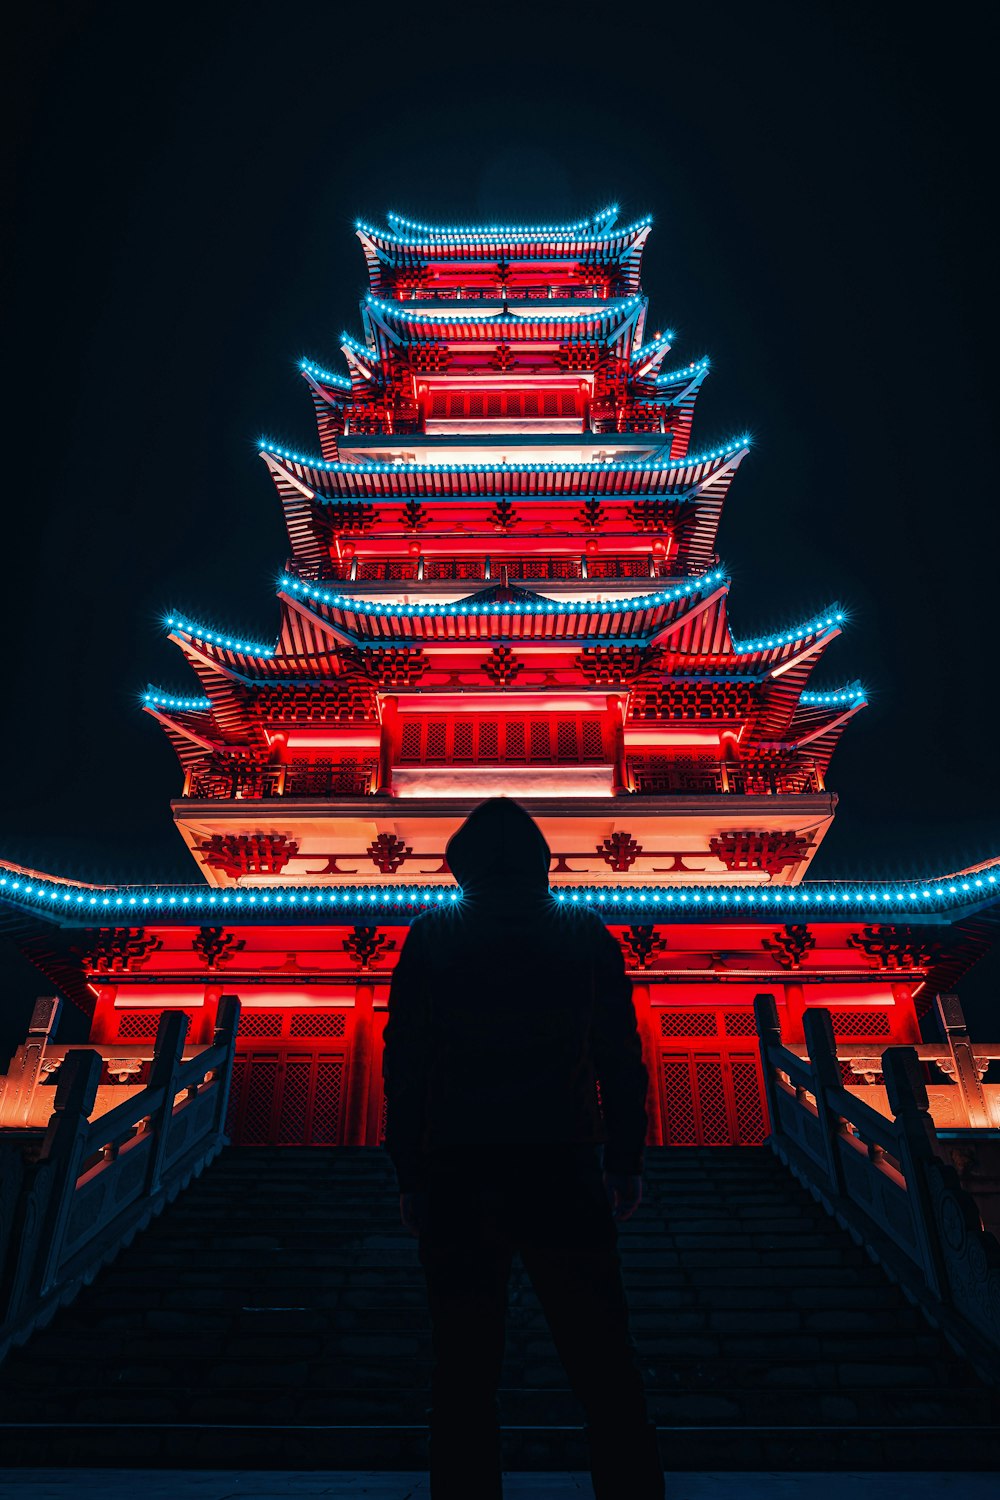 woman in black long sleeve shirt standing in front of temple during nighttime